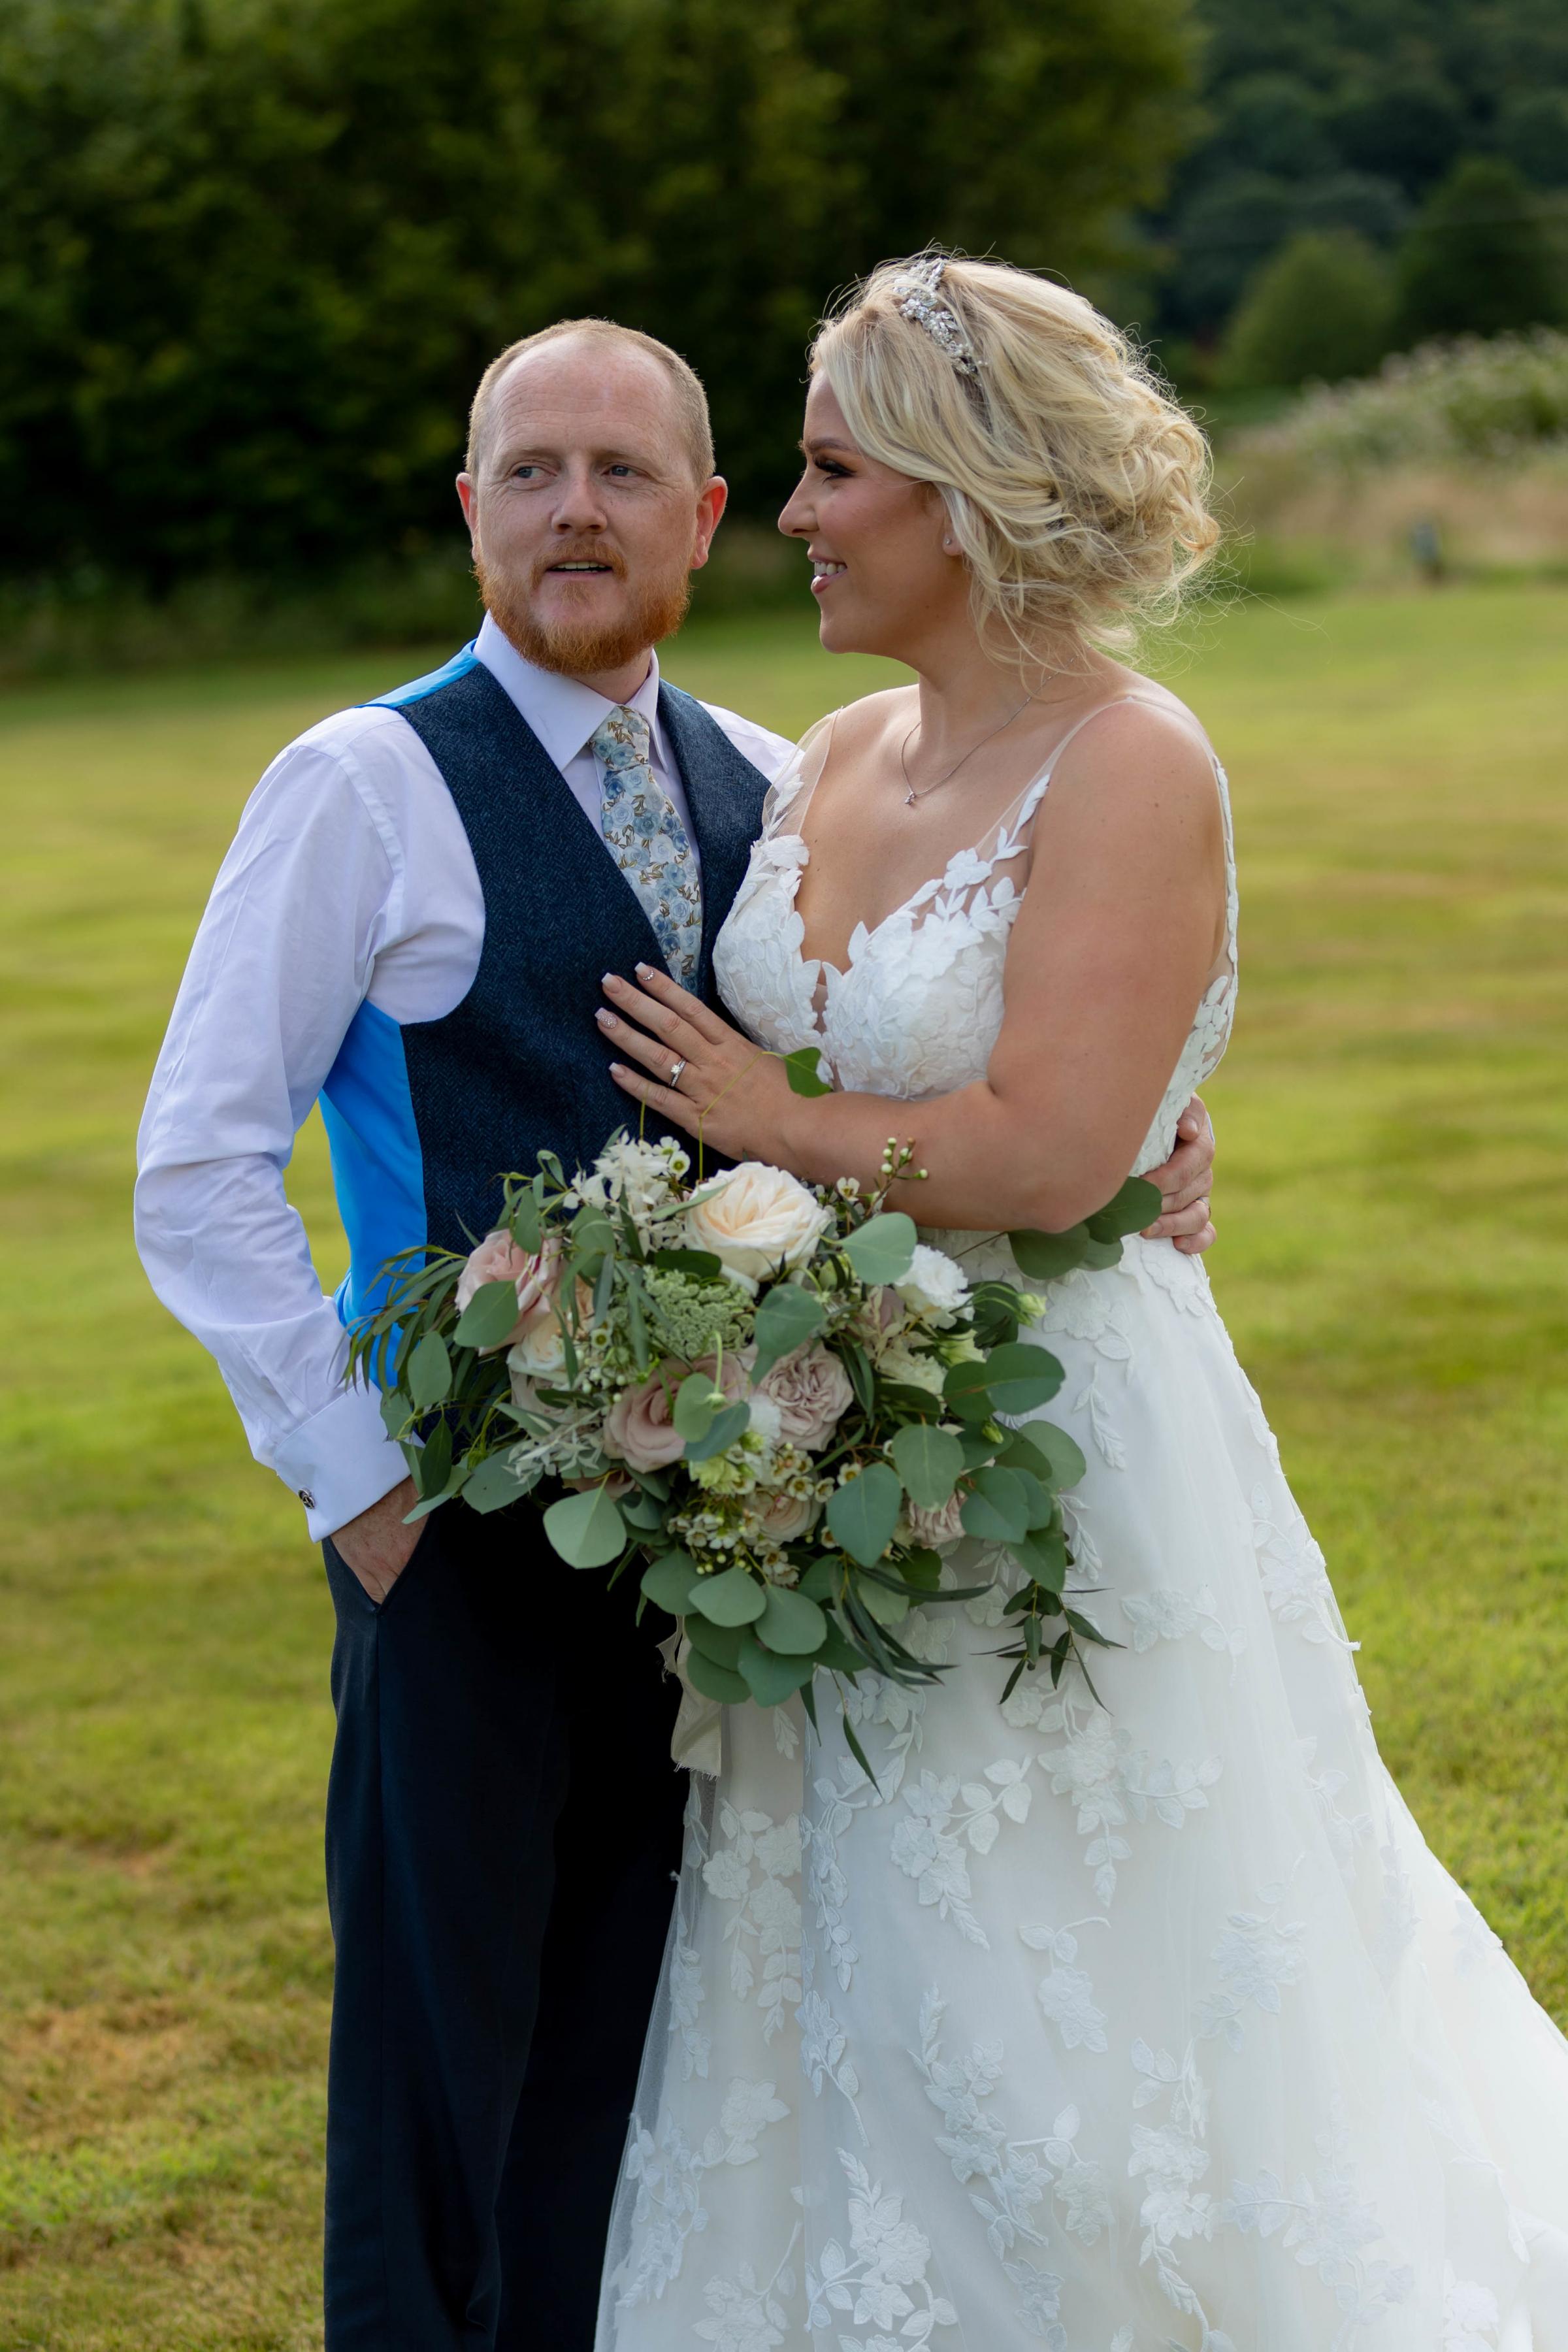 Jess and Deans wedding at Hafod Farm. All photographs: Nathan Roberts Photography